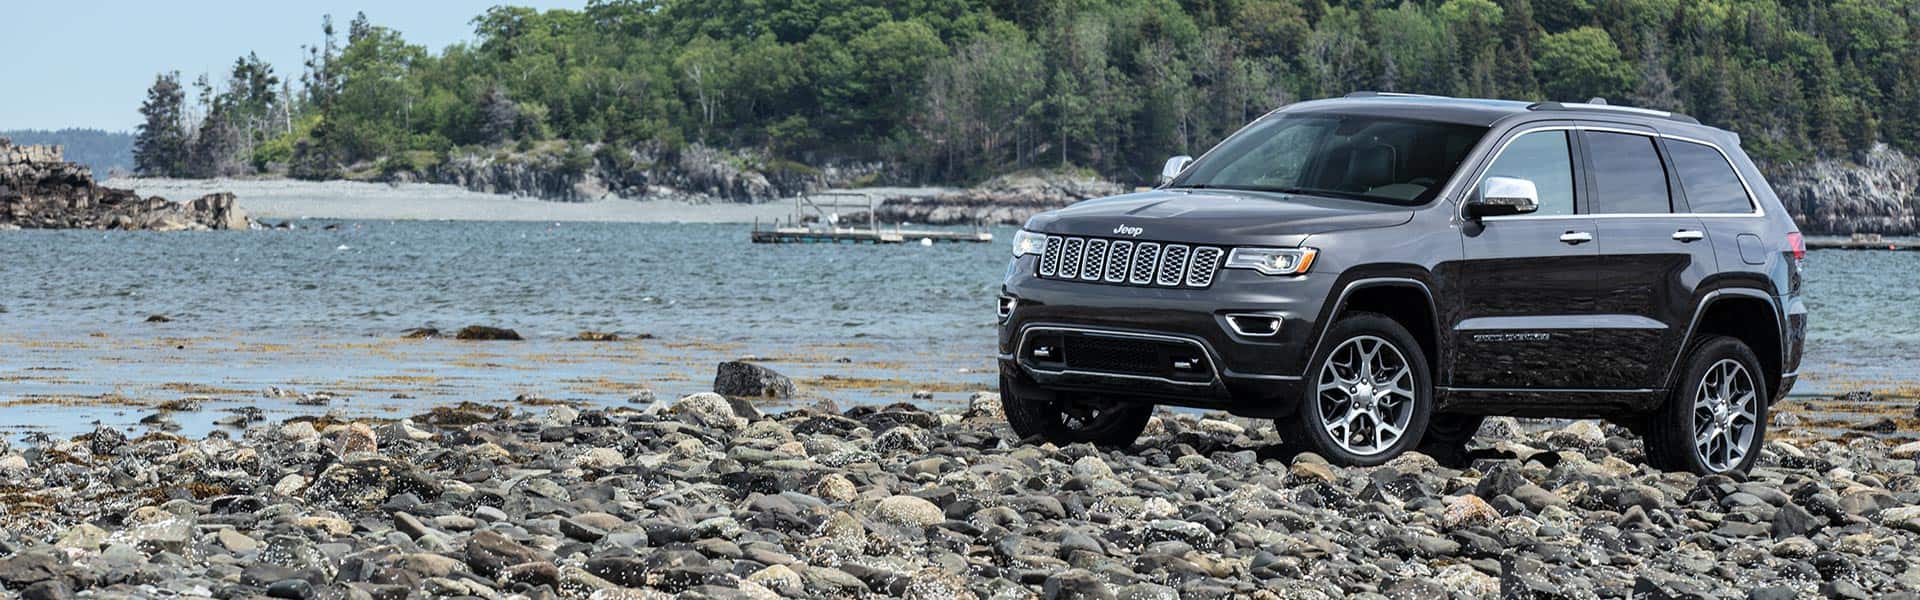 The 2021 Jeep Grand Cherokee Limited parked on a rocky beach.